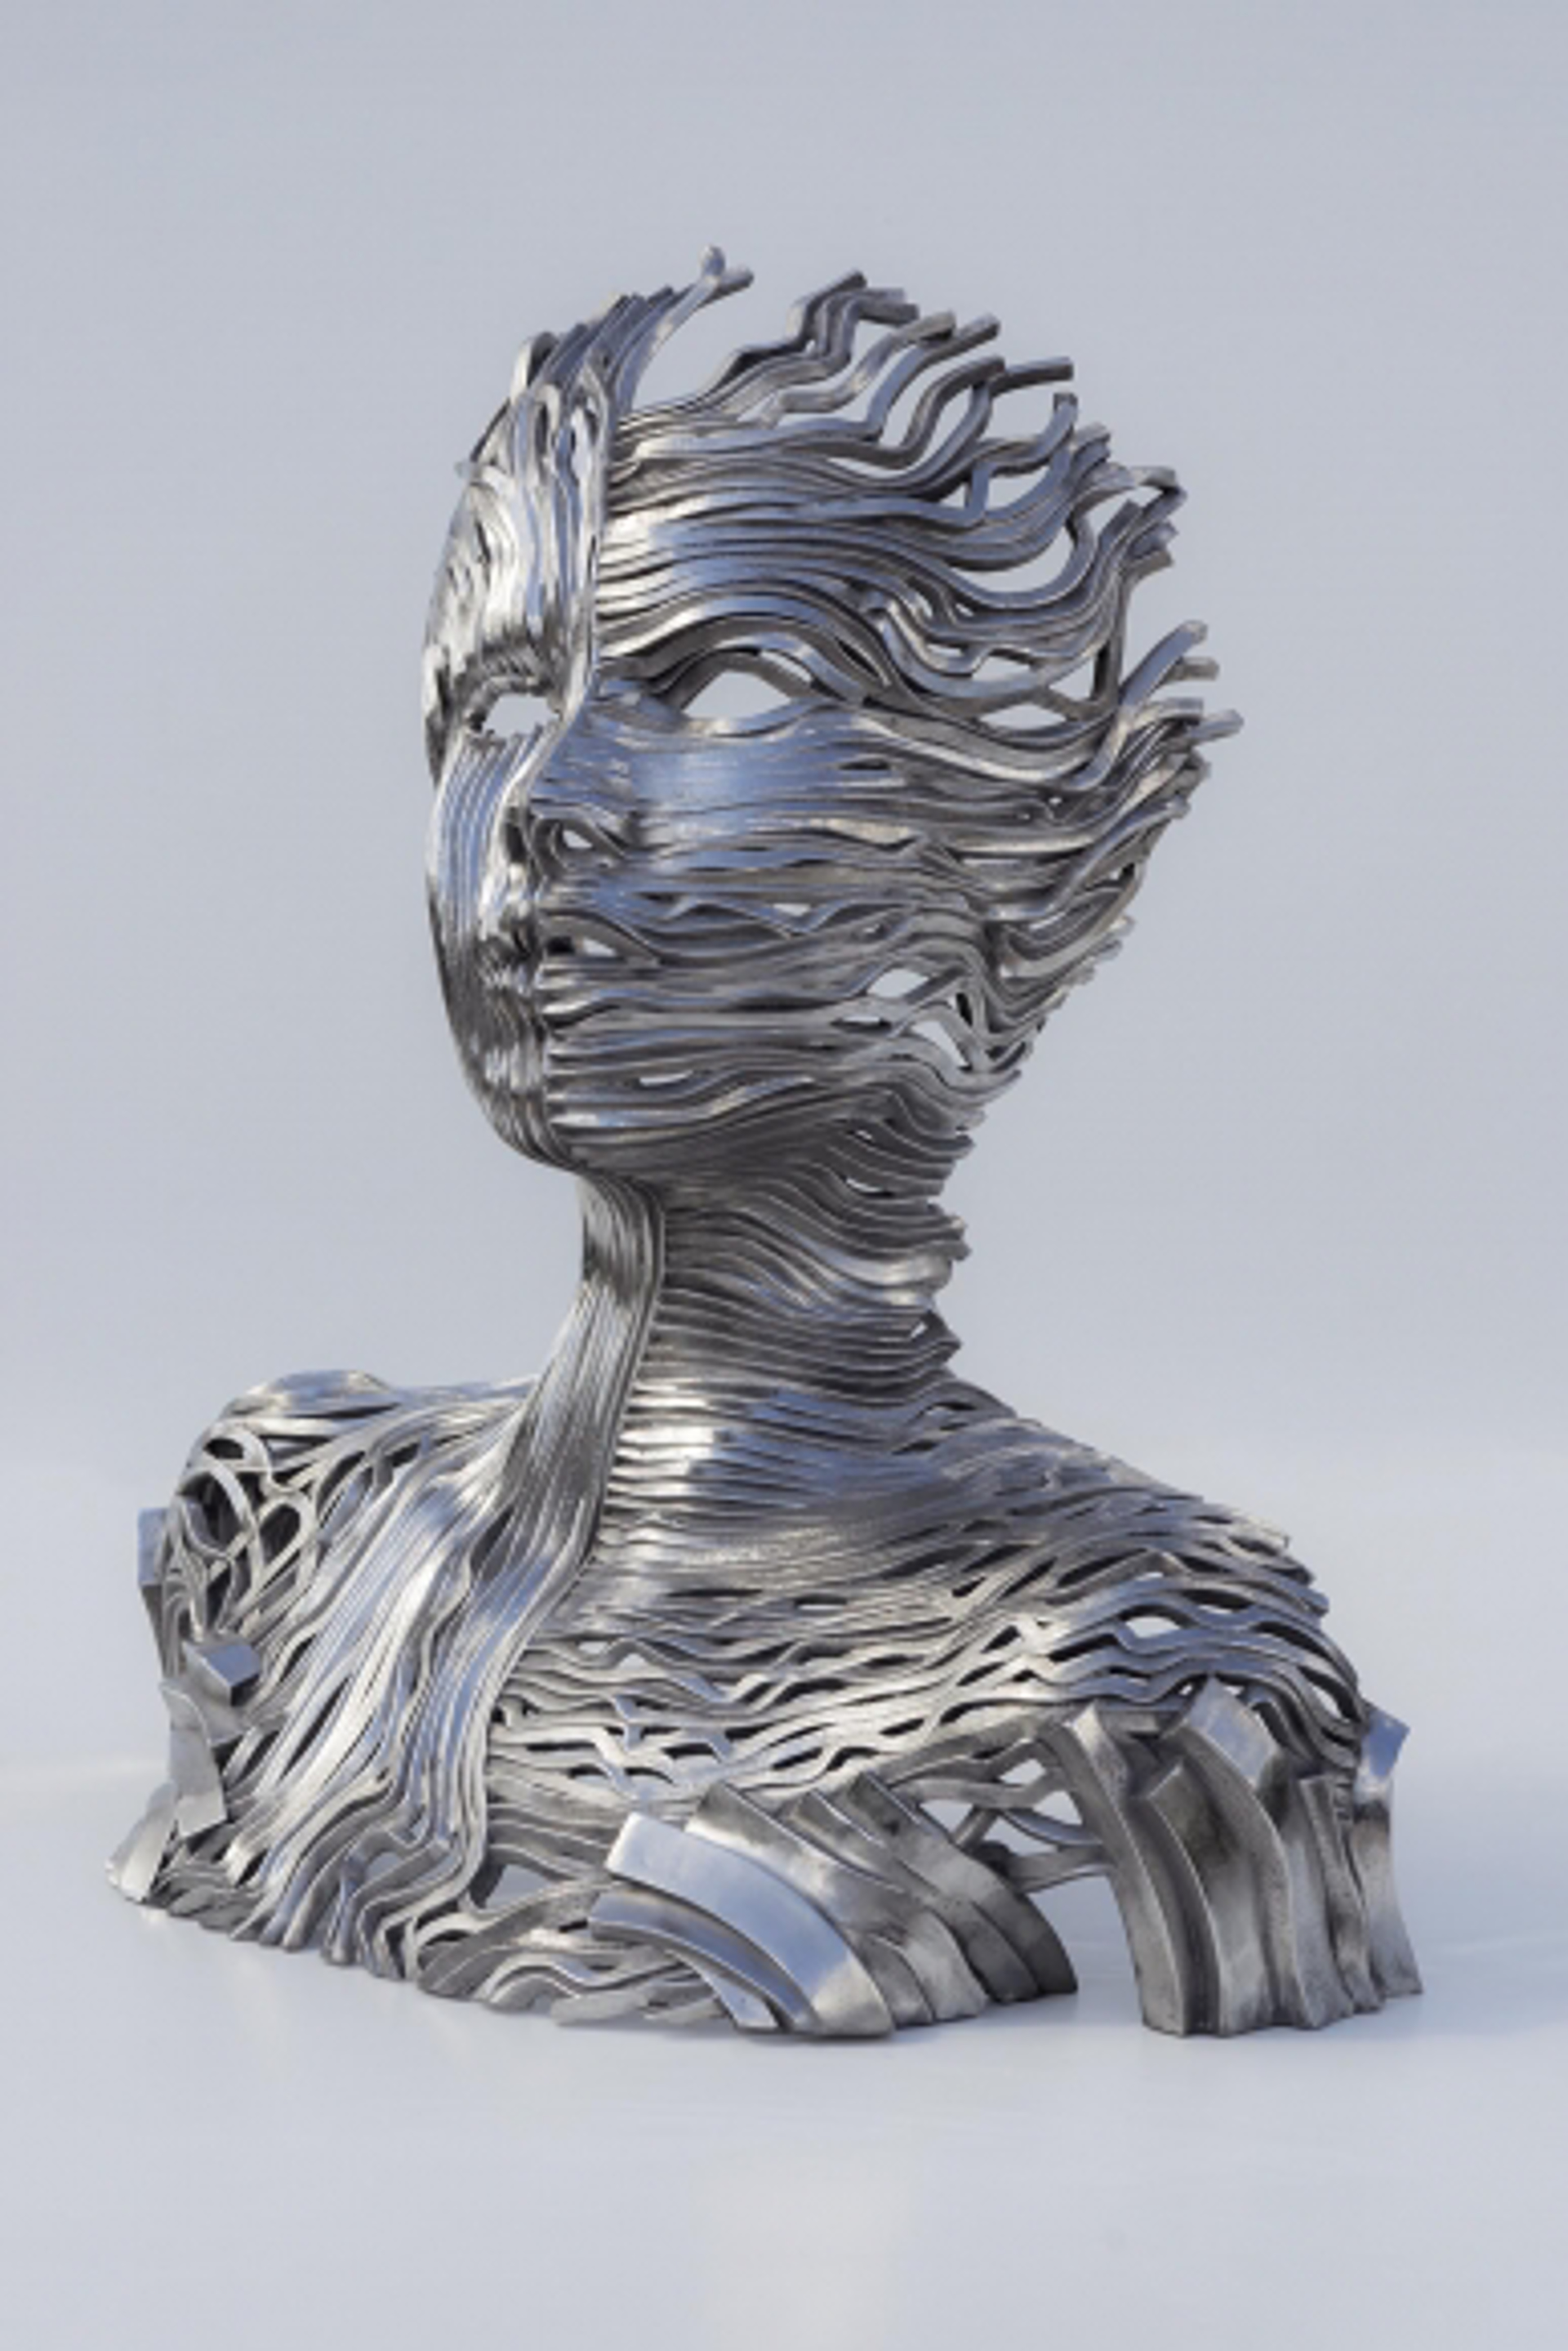 Dichotomy by Gil Bruvel